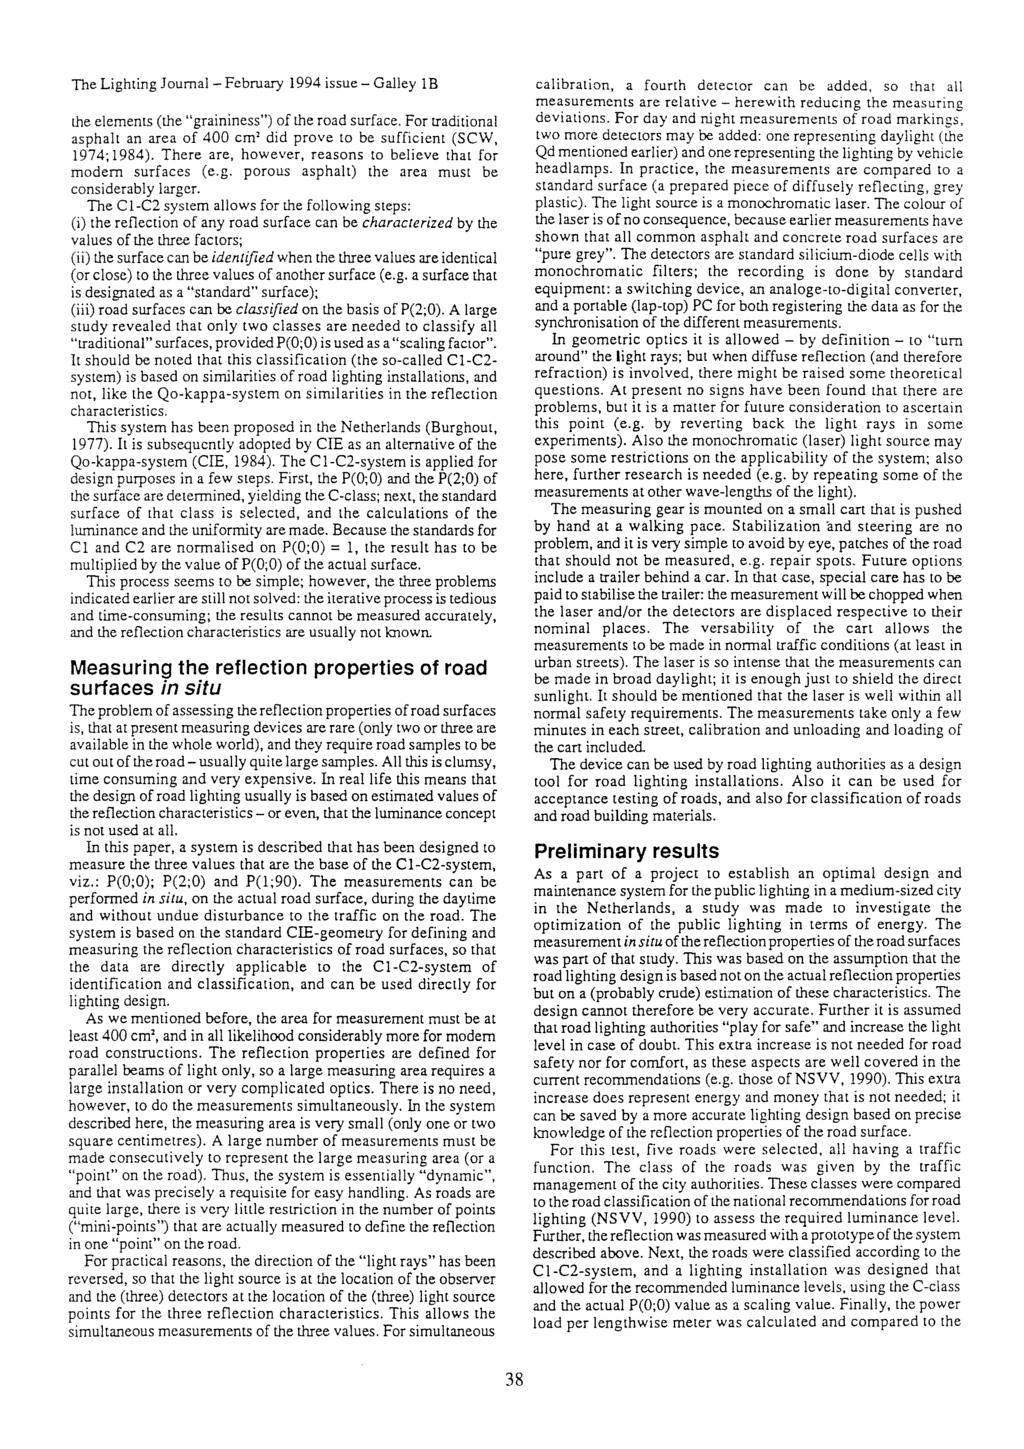 The Lighting Joumal- February 1994 issue - Galley lb the elements (the "graininess") of the road surface. For traditional asphalt an area of 400 cm l did prove to be sufficient (SCW, 1974; 1984).